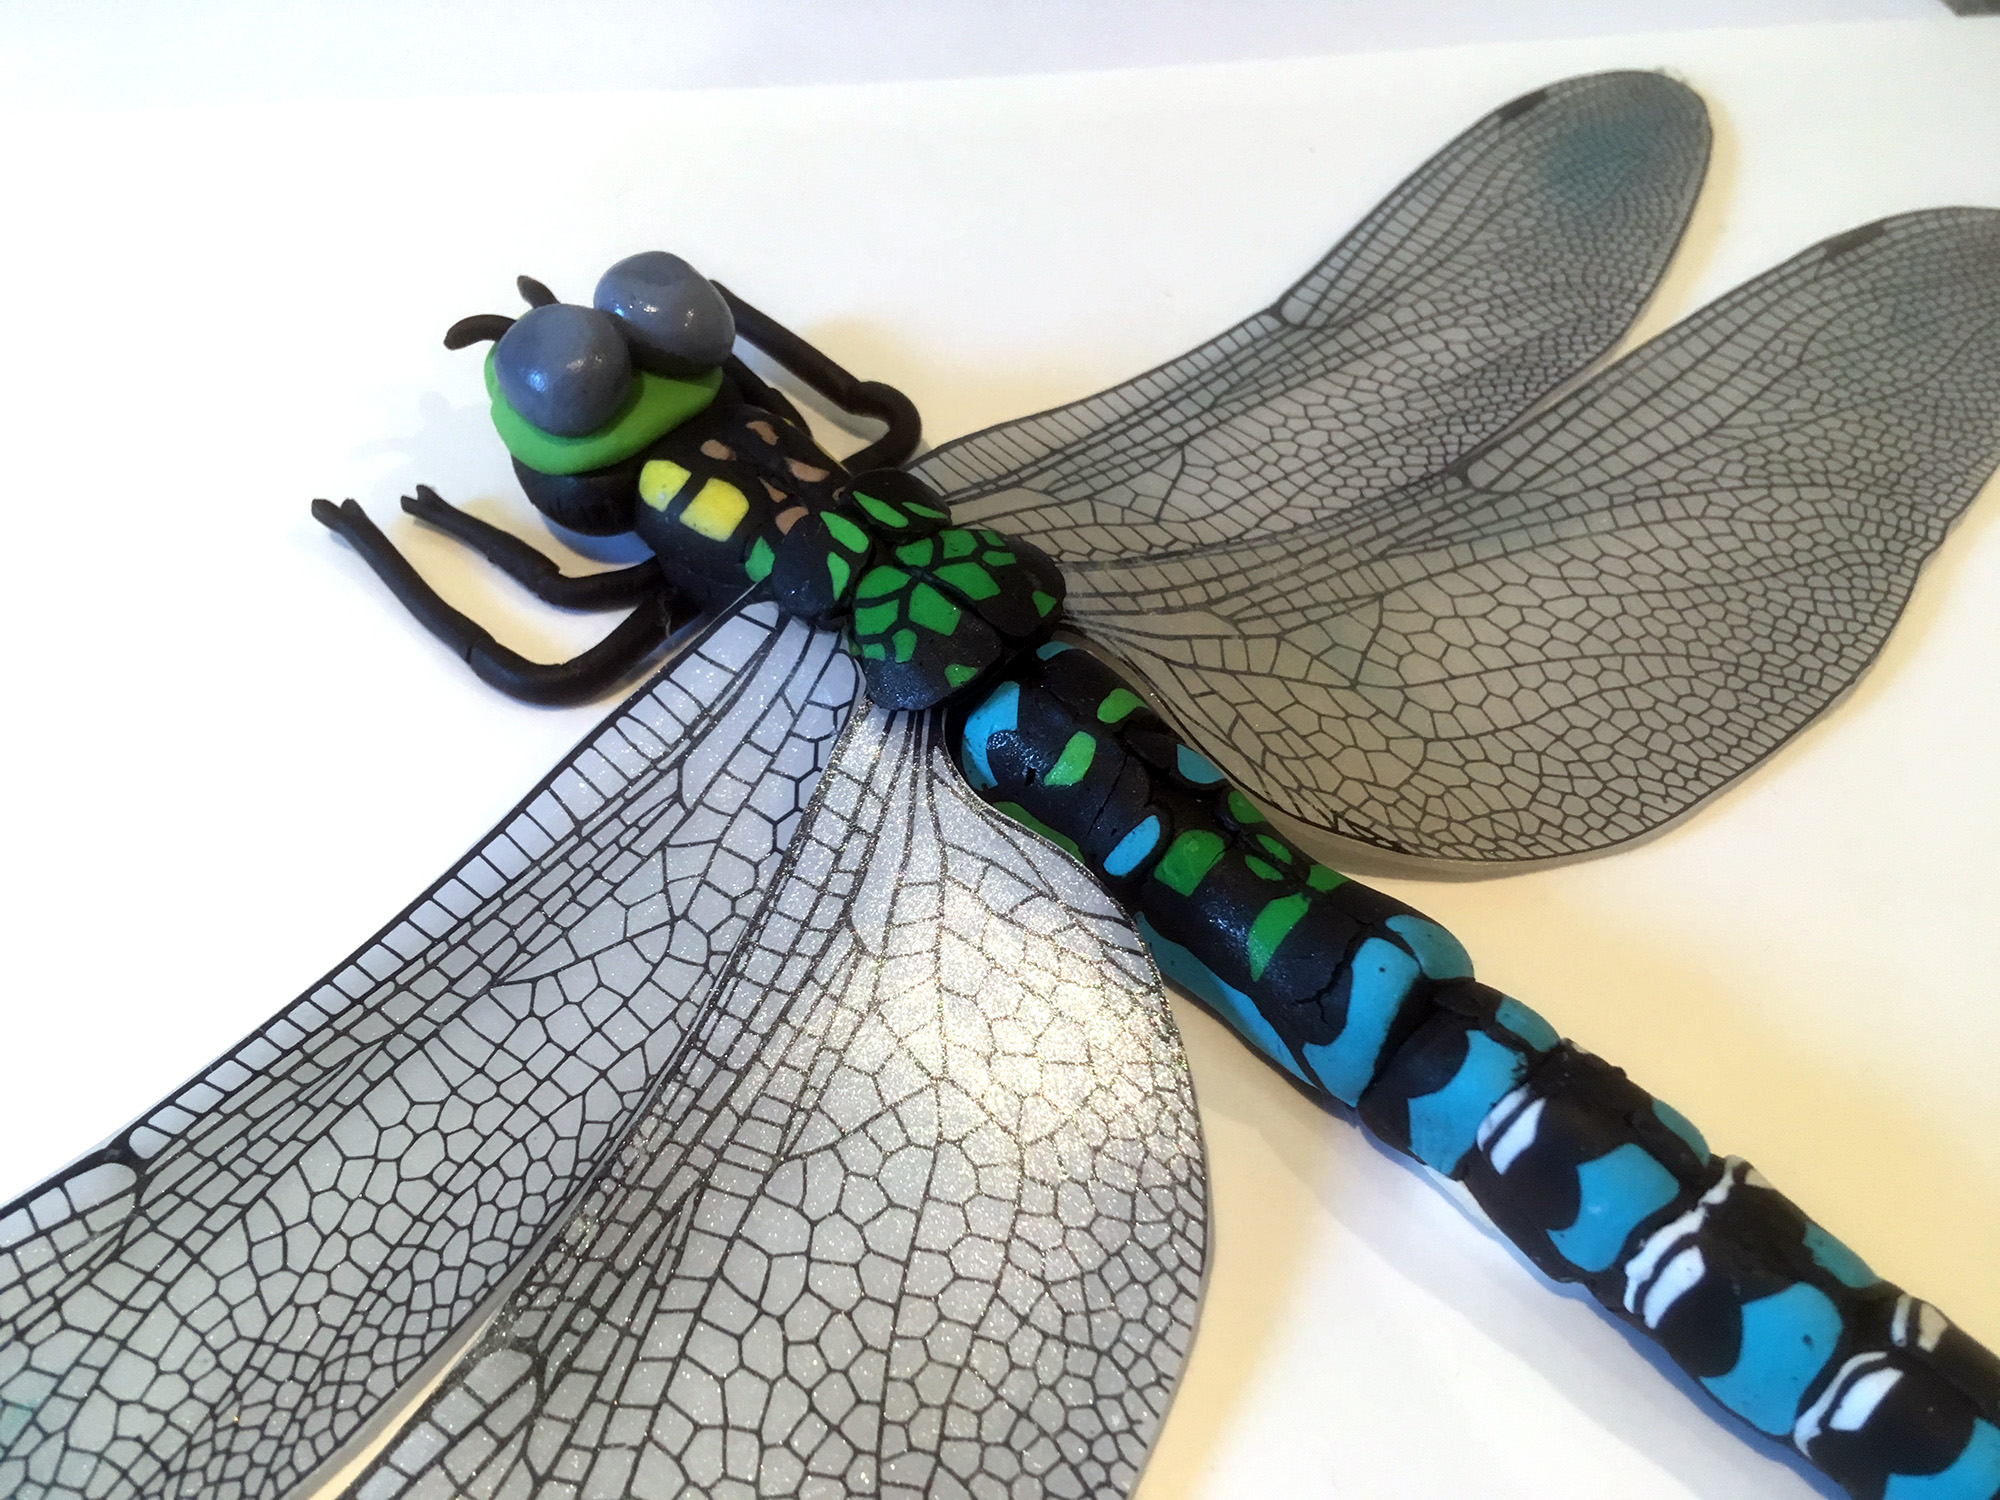 Dragonfly Wall Sculpture - Southern Hawker